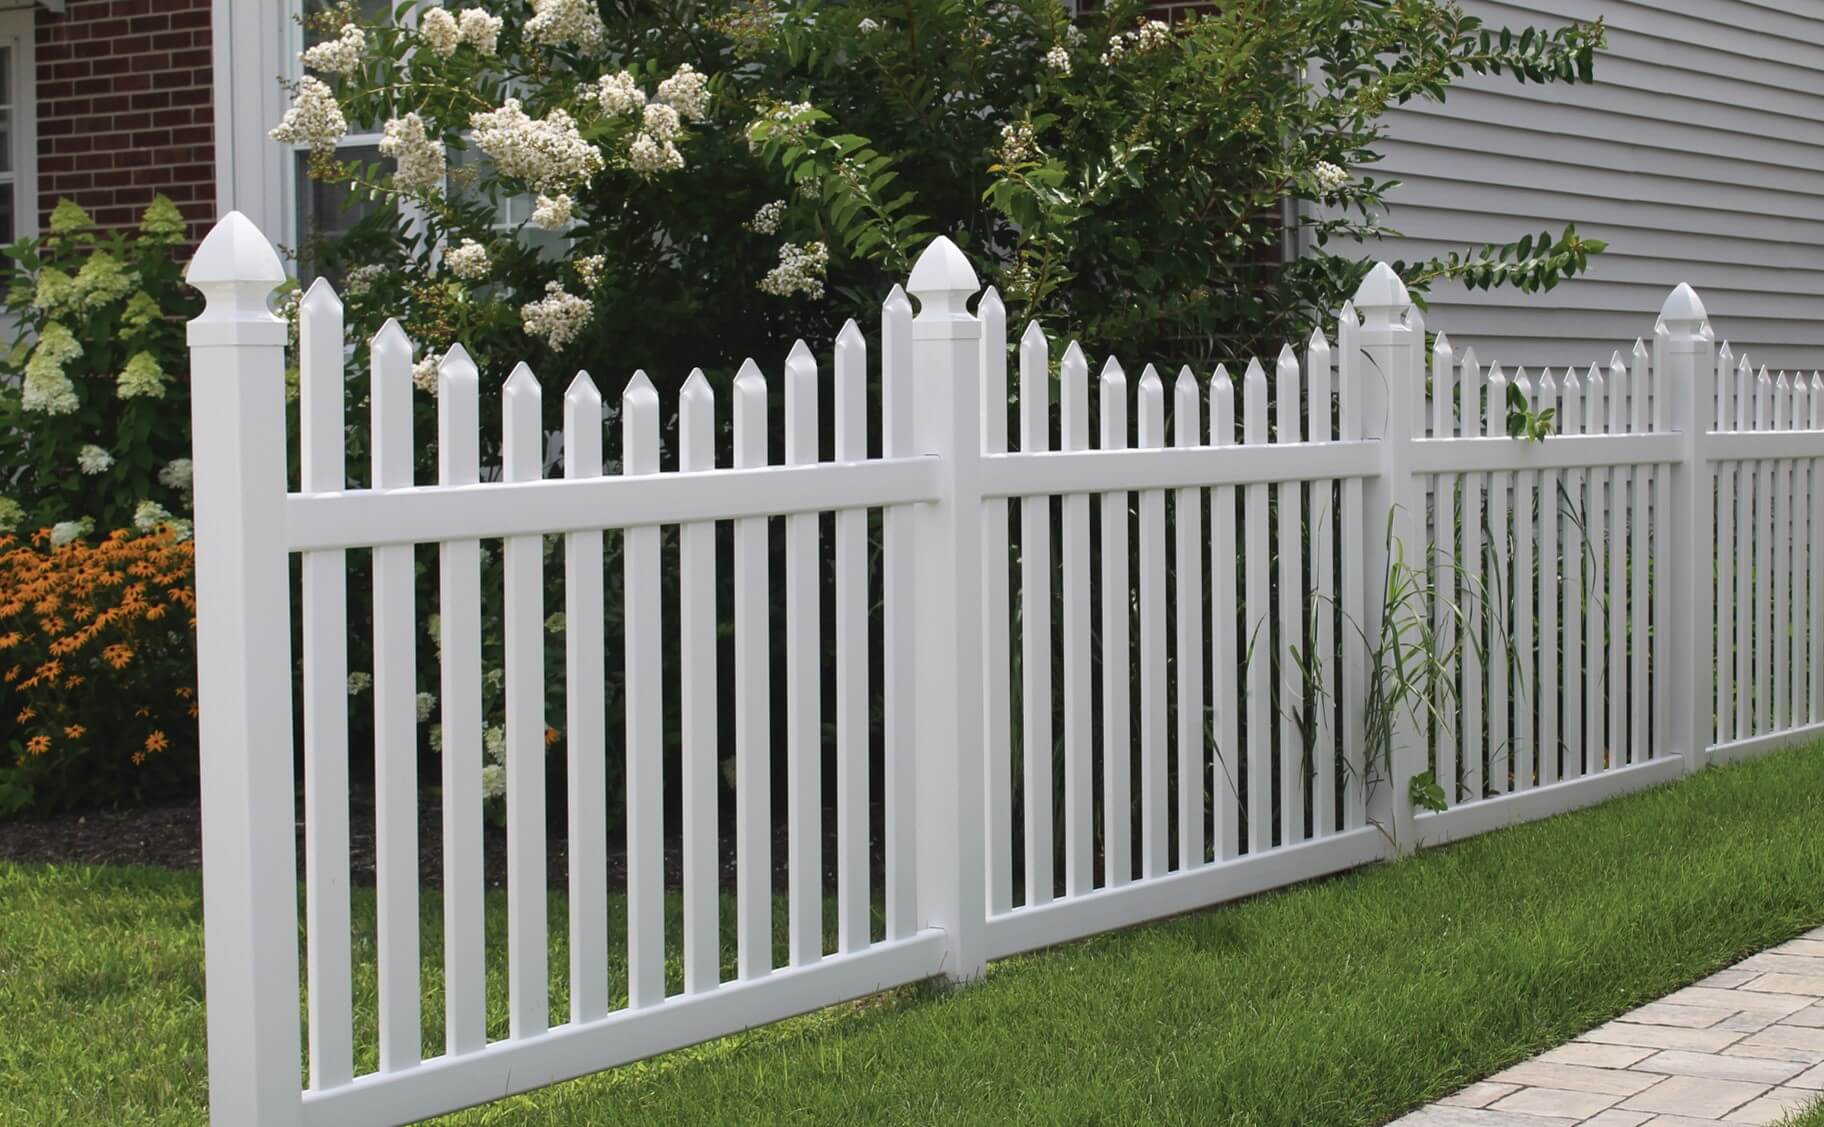 The Classic Picket Fence omaha